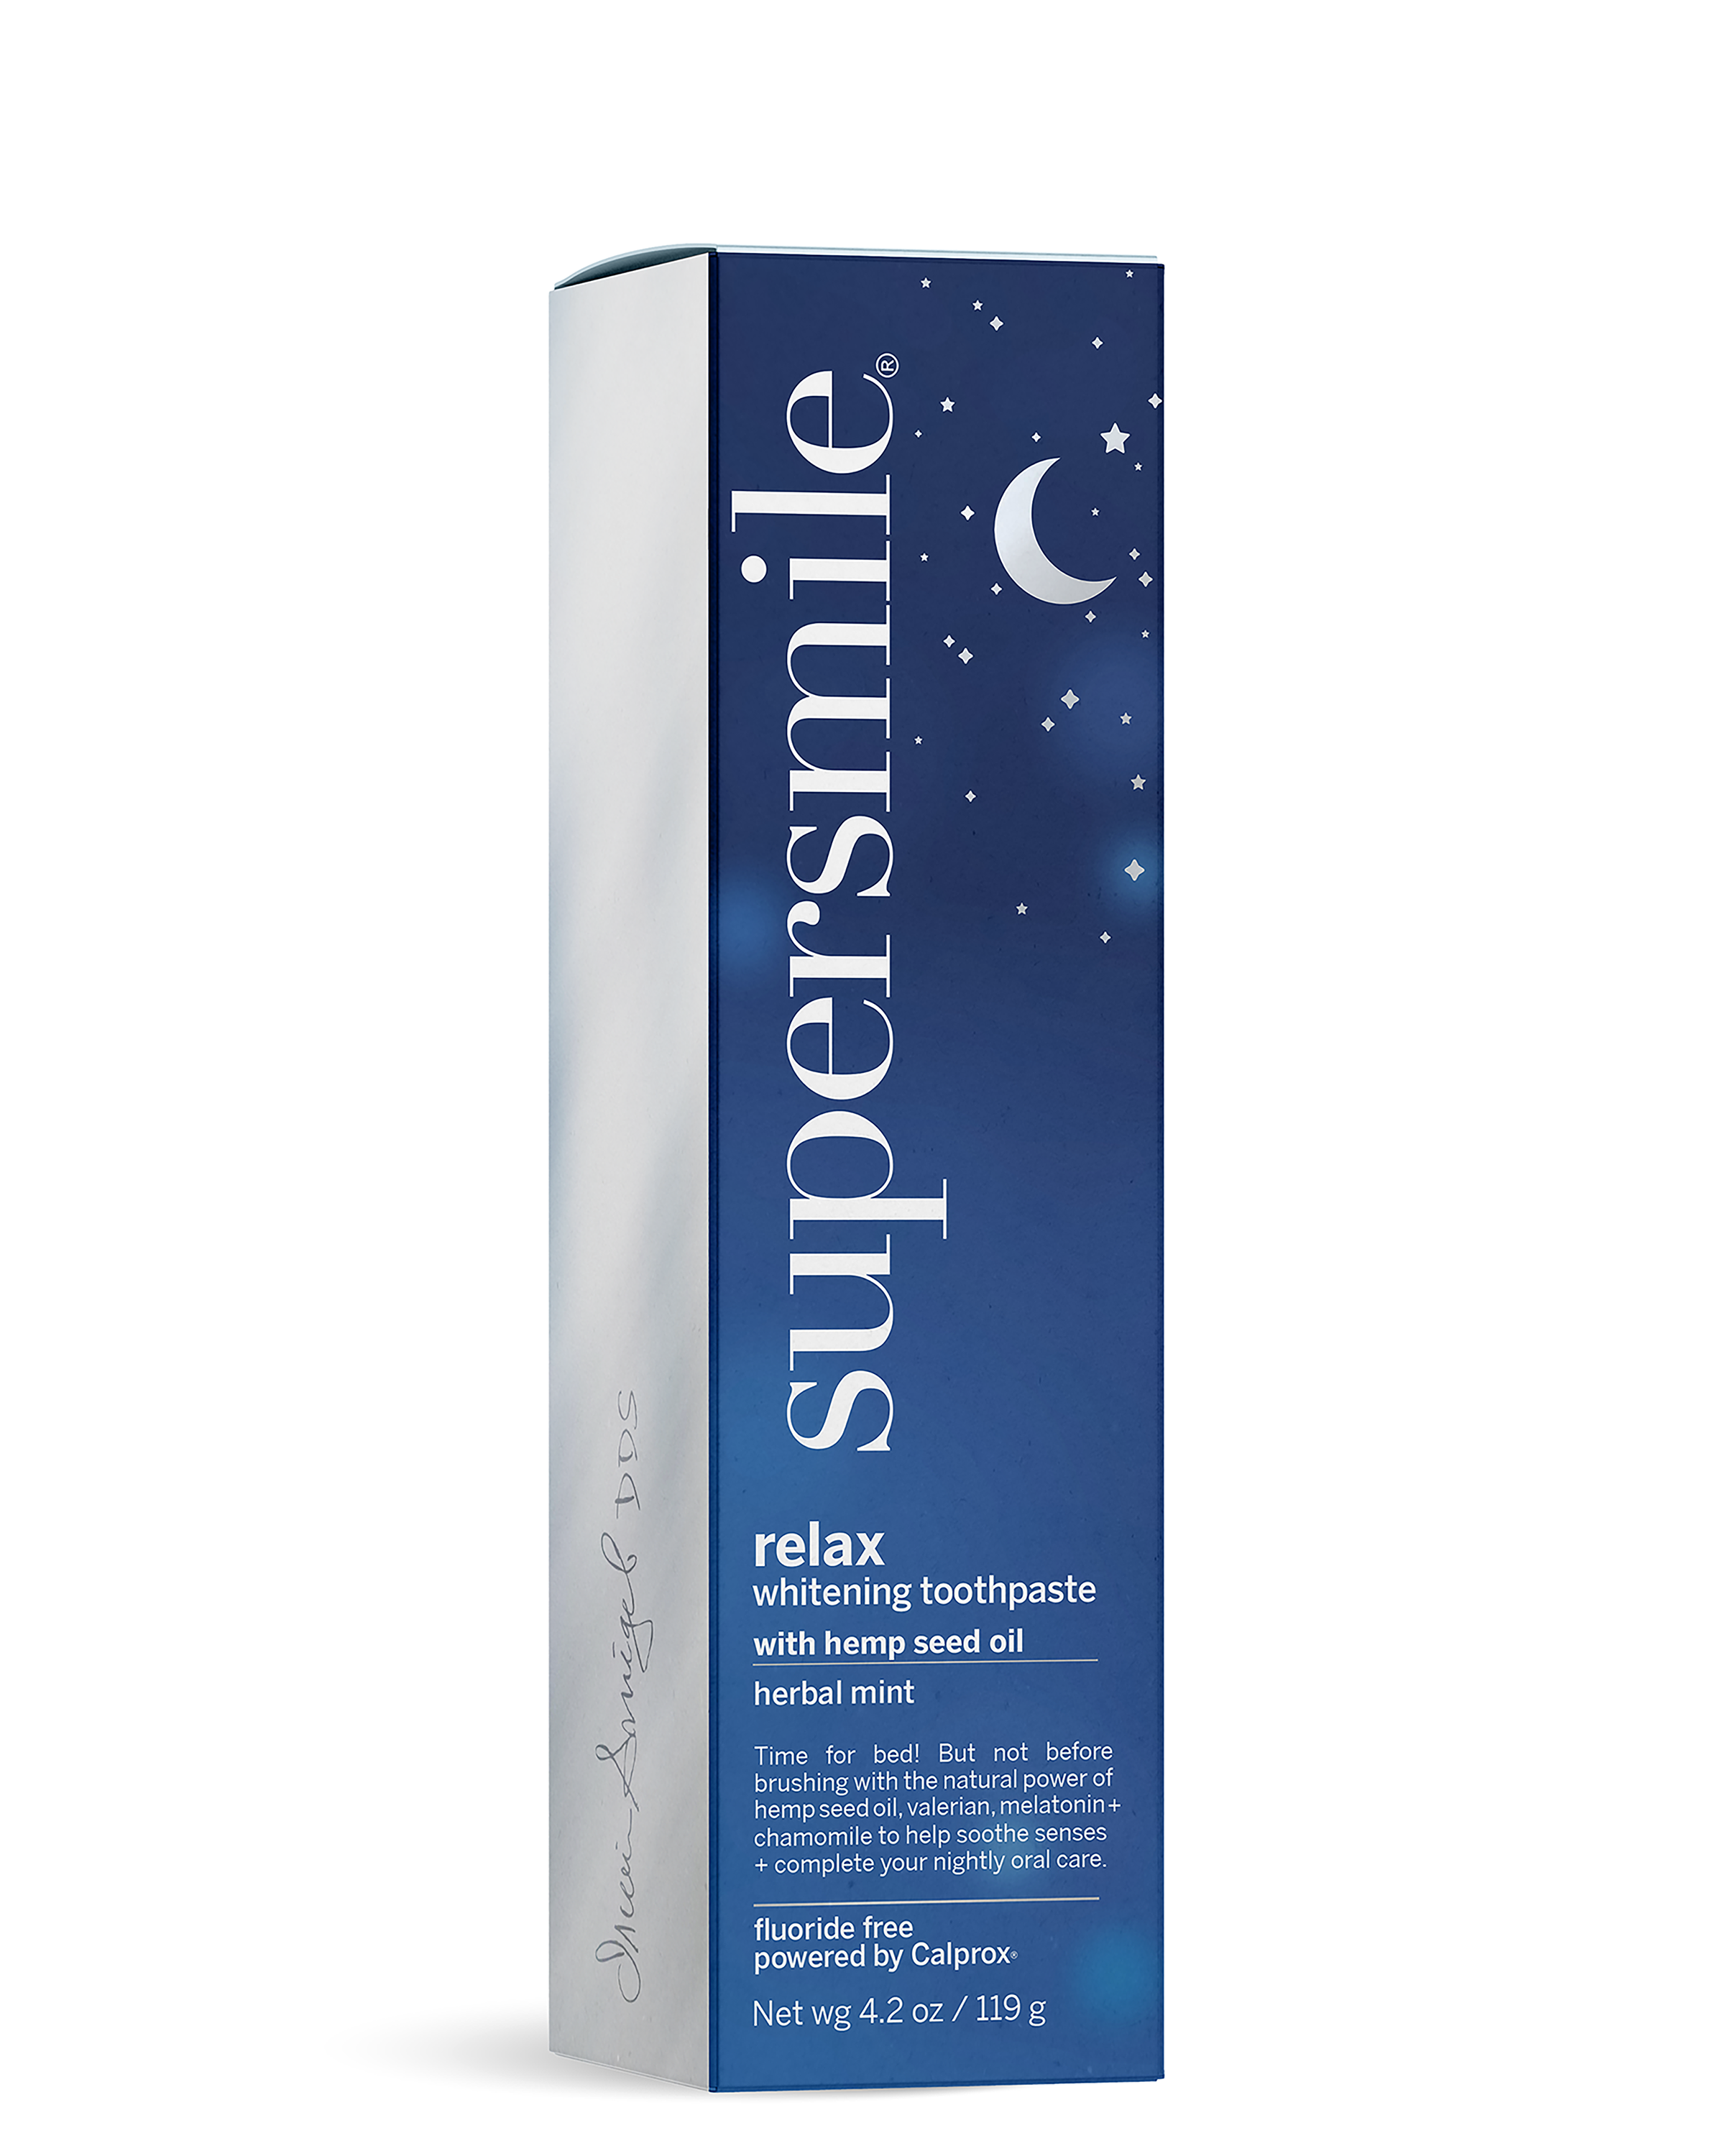 Relax Whitening Toothpaste Box Side